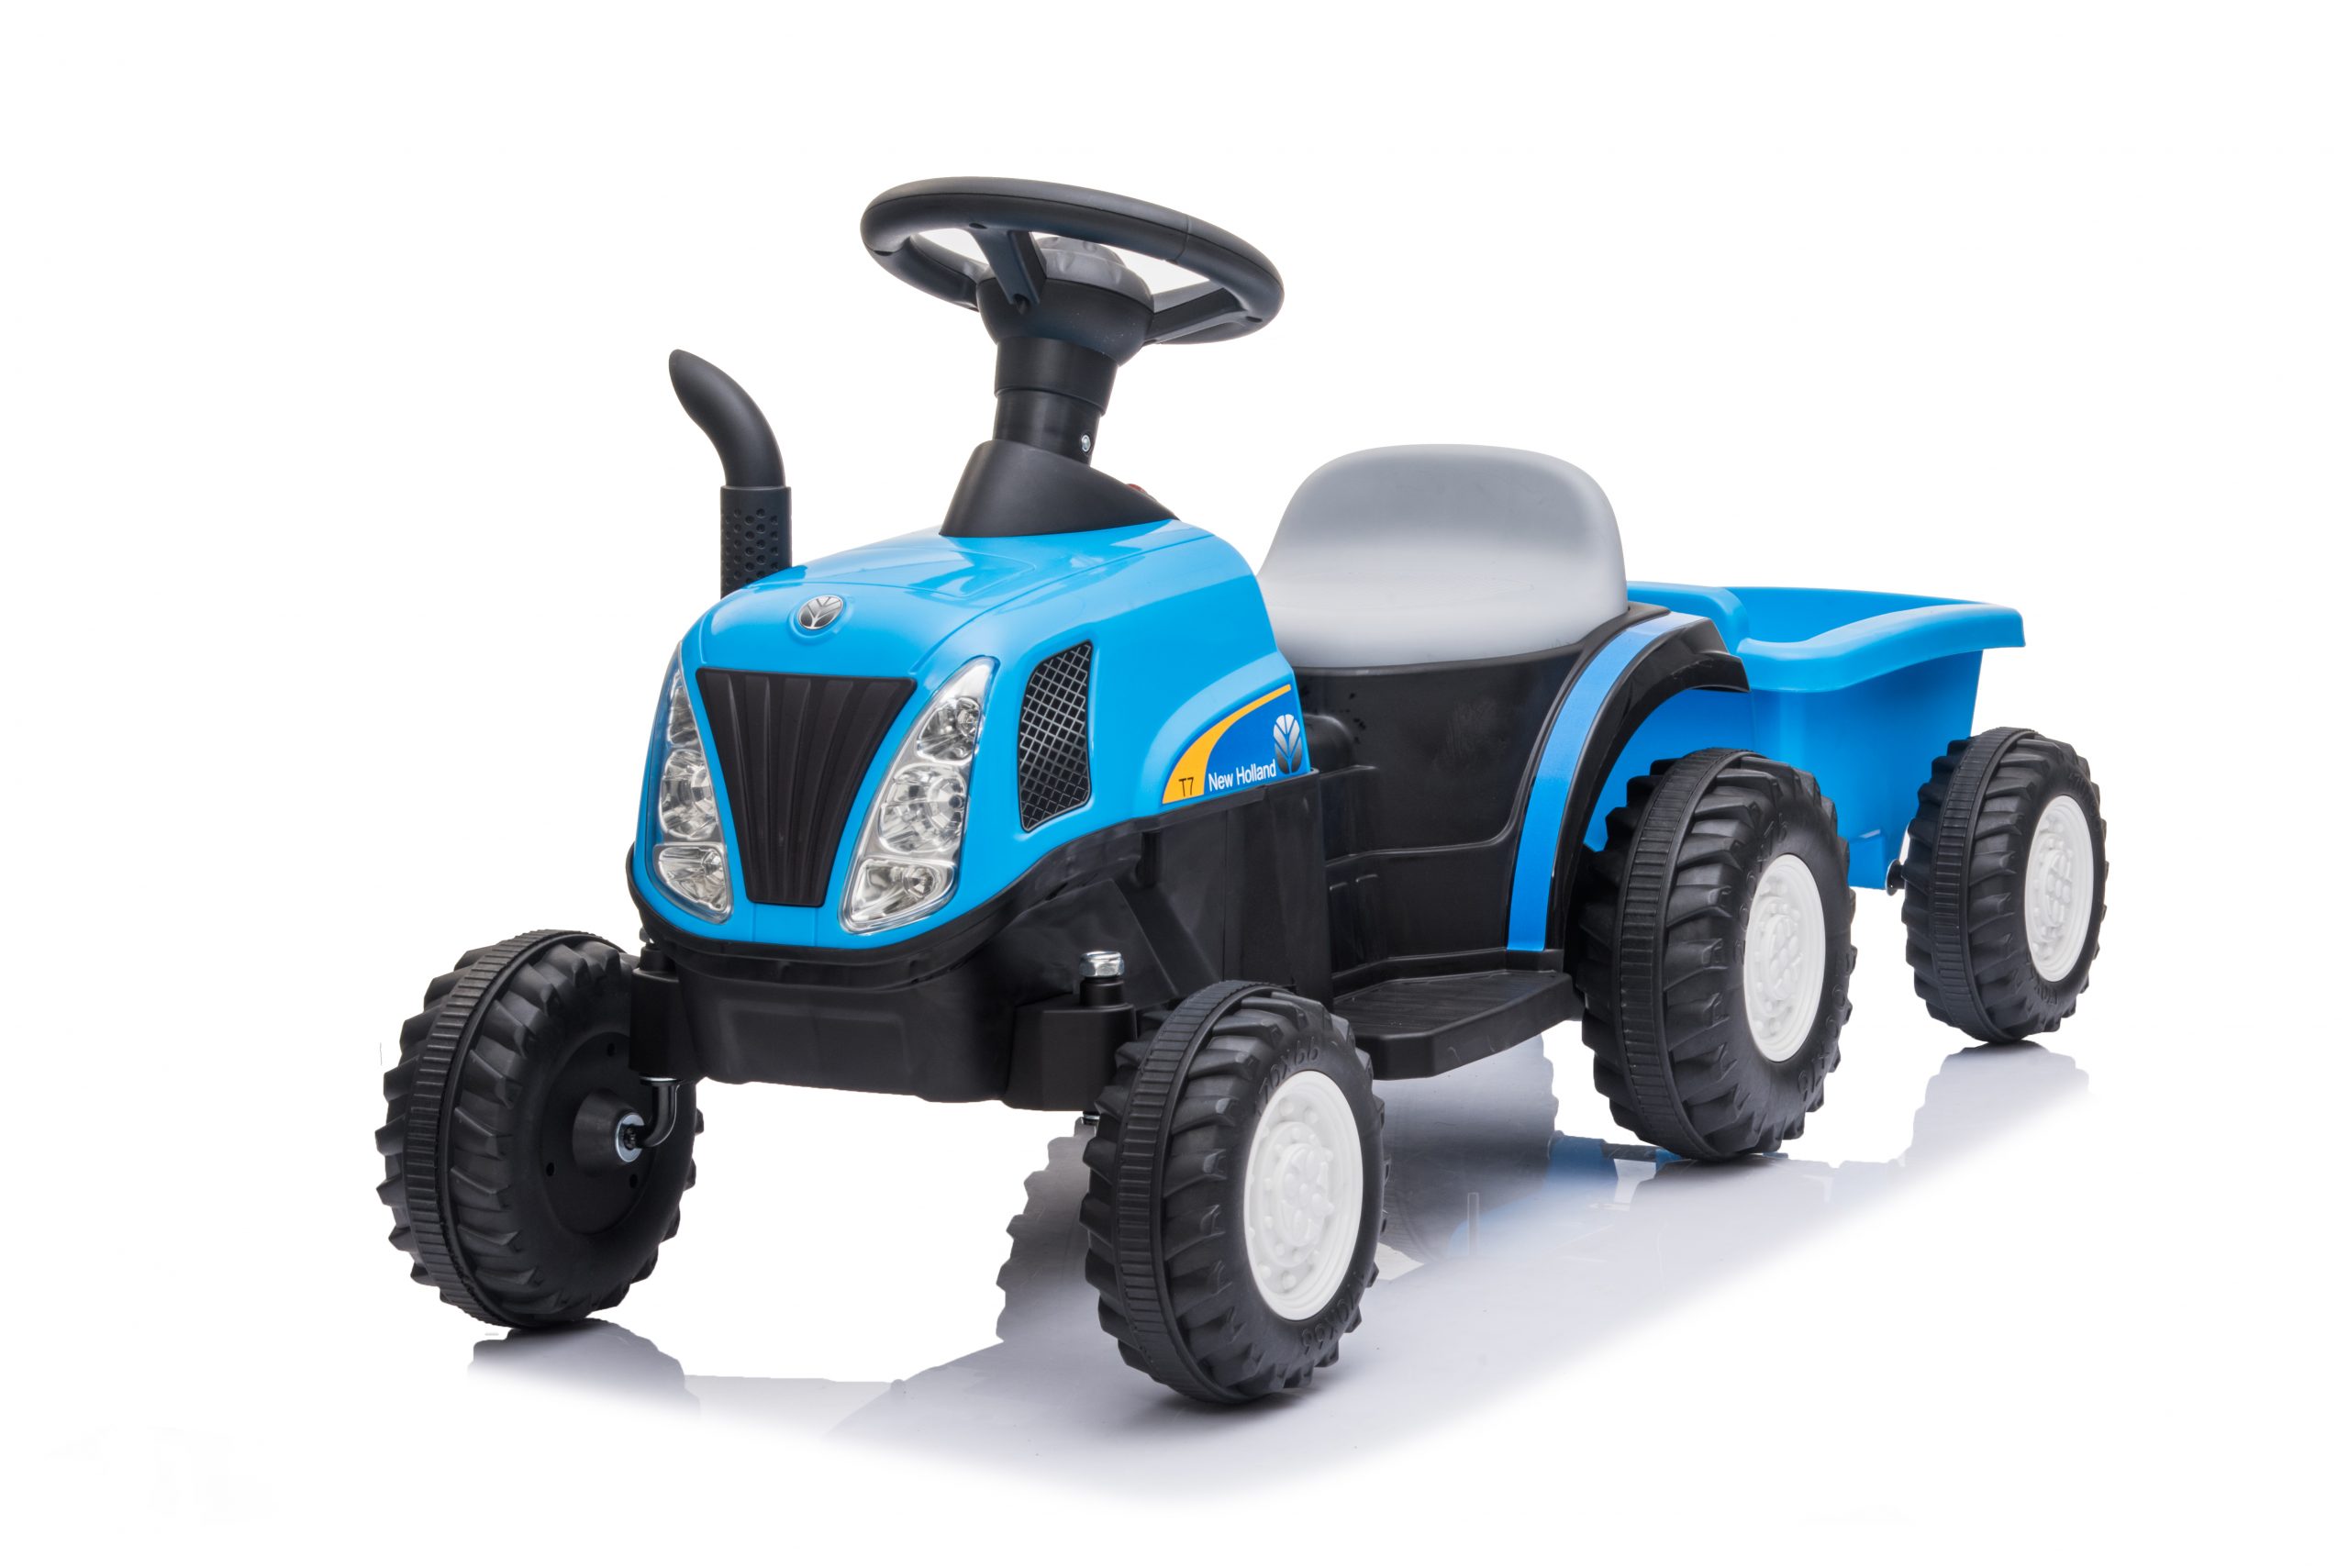 Trattore new holland small - 